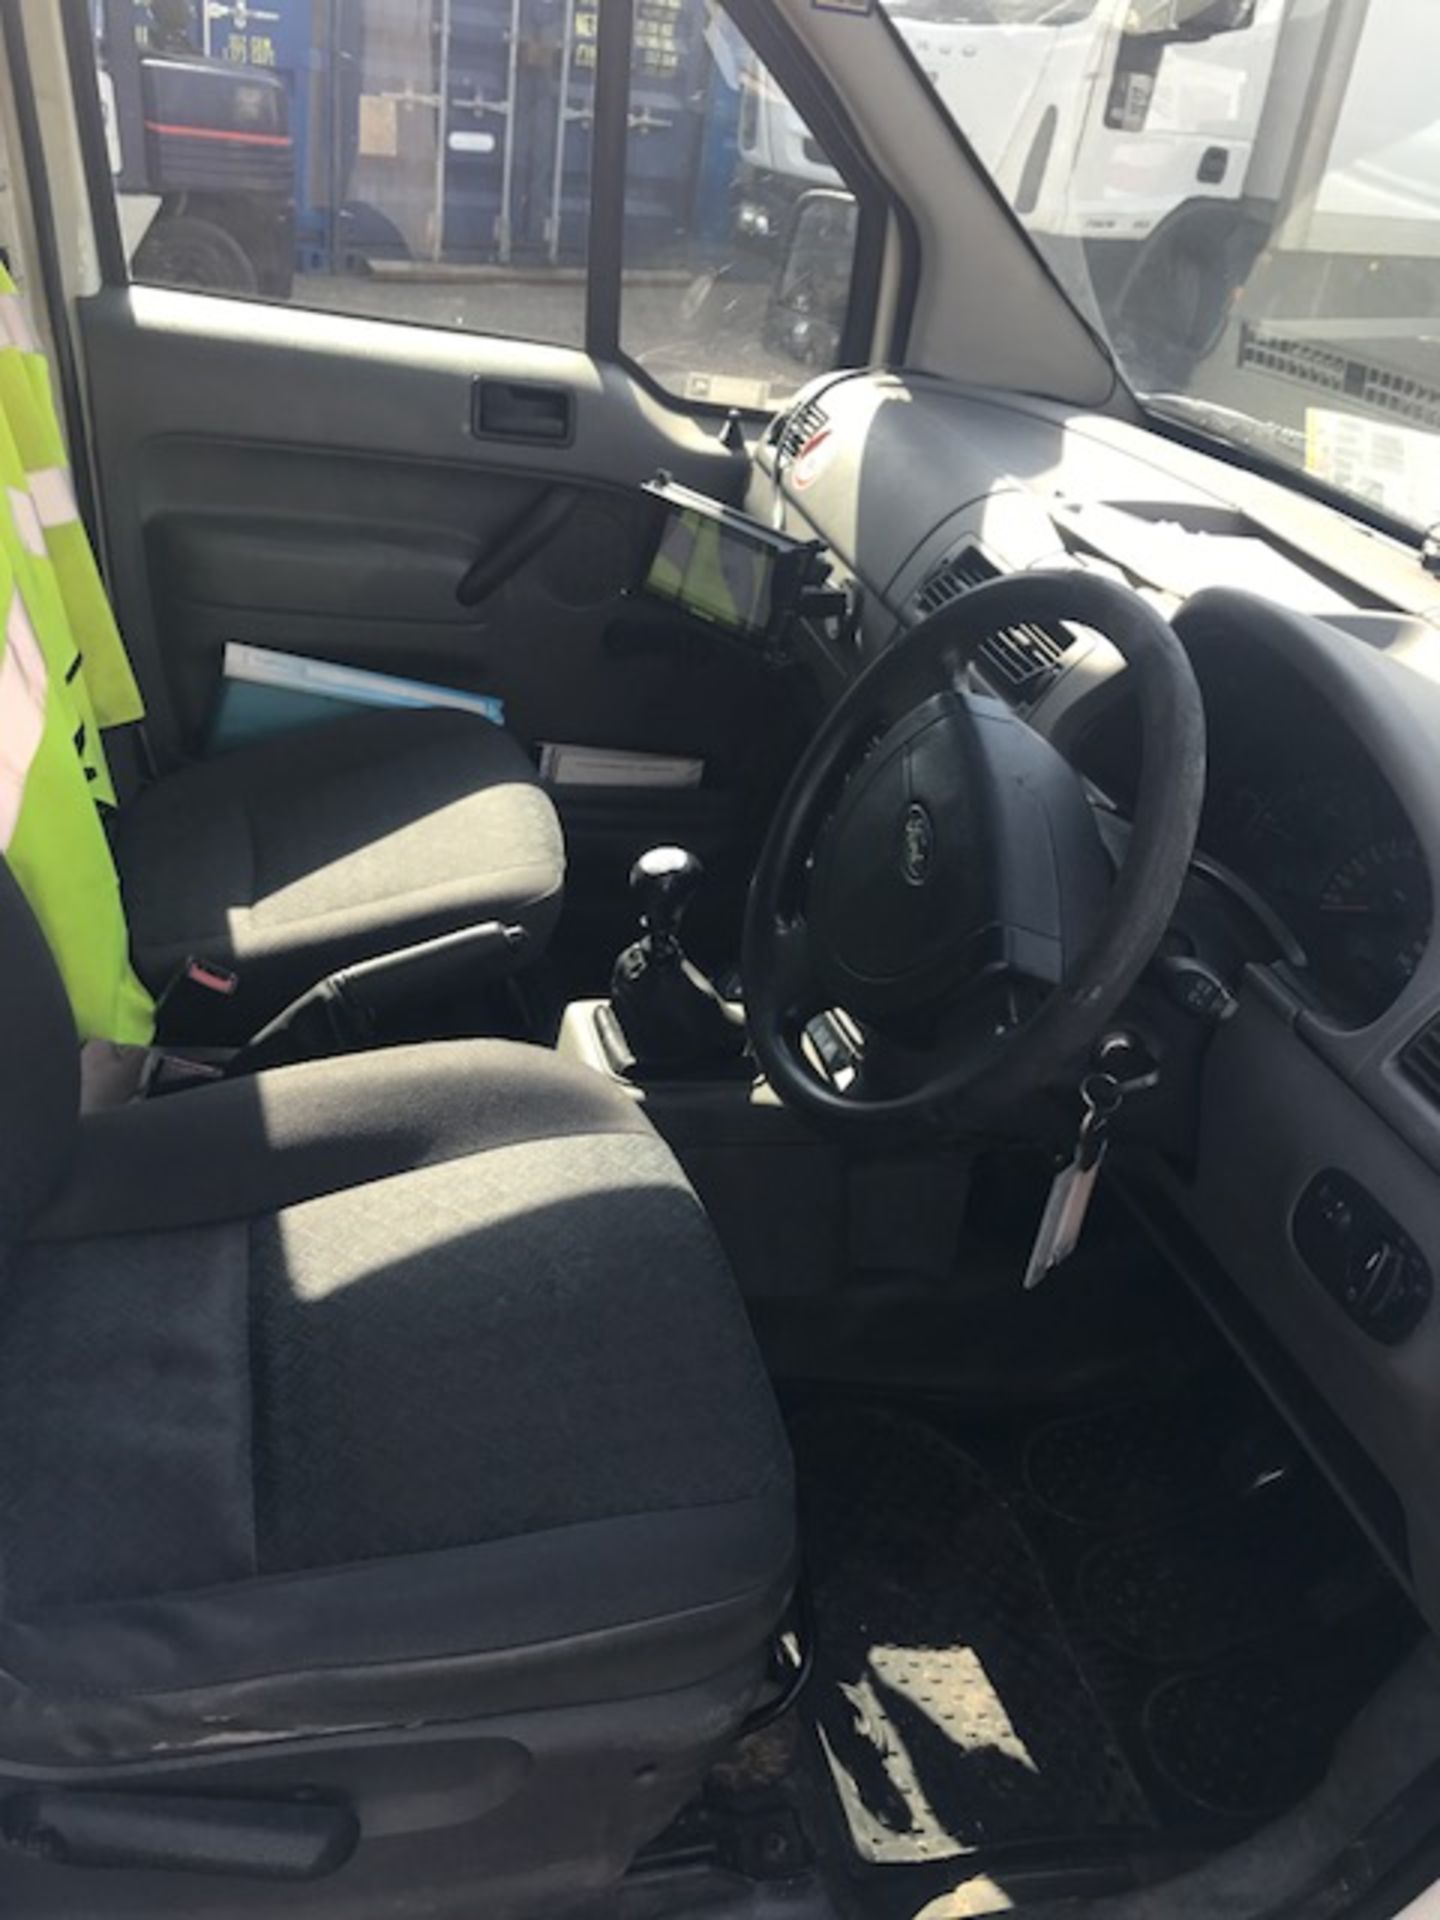 2004 Ford Transit Connect T200 panel van complete with Garmin satnav, camera and Anderson jump-start - Image 9 of 13